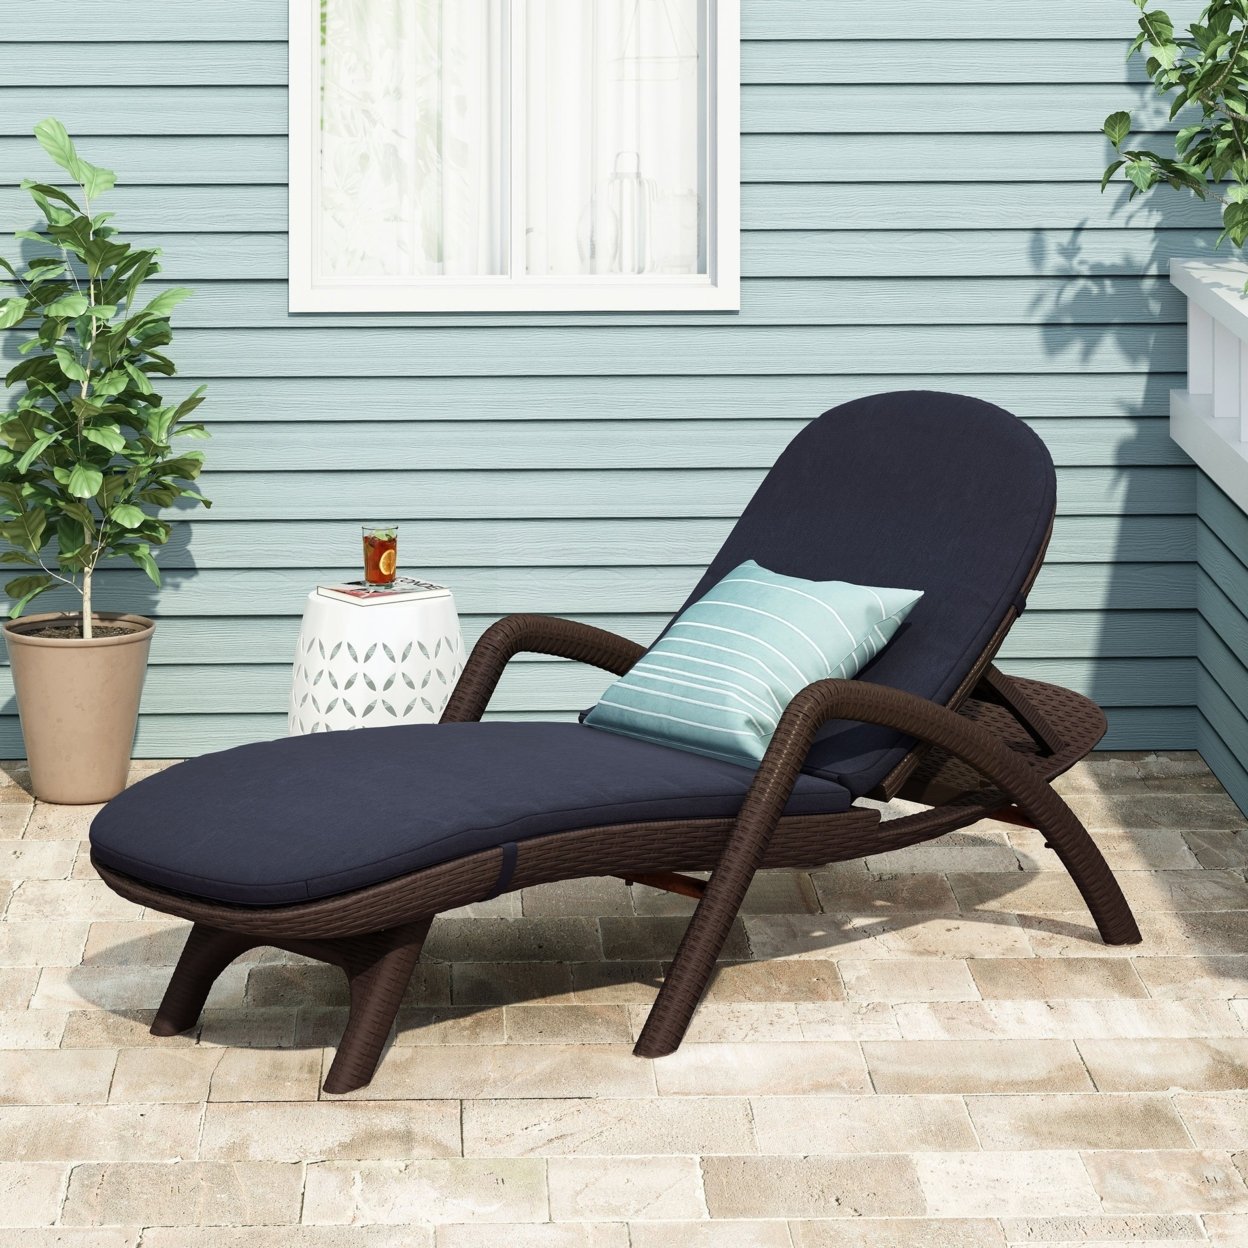 Riley Outdoor Faux Wicker Chaise Lounge With Cushion - Dark Brown/beige